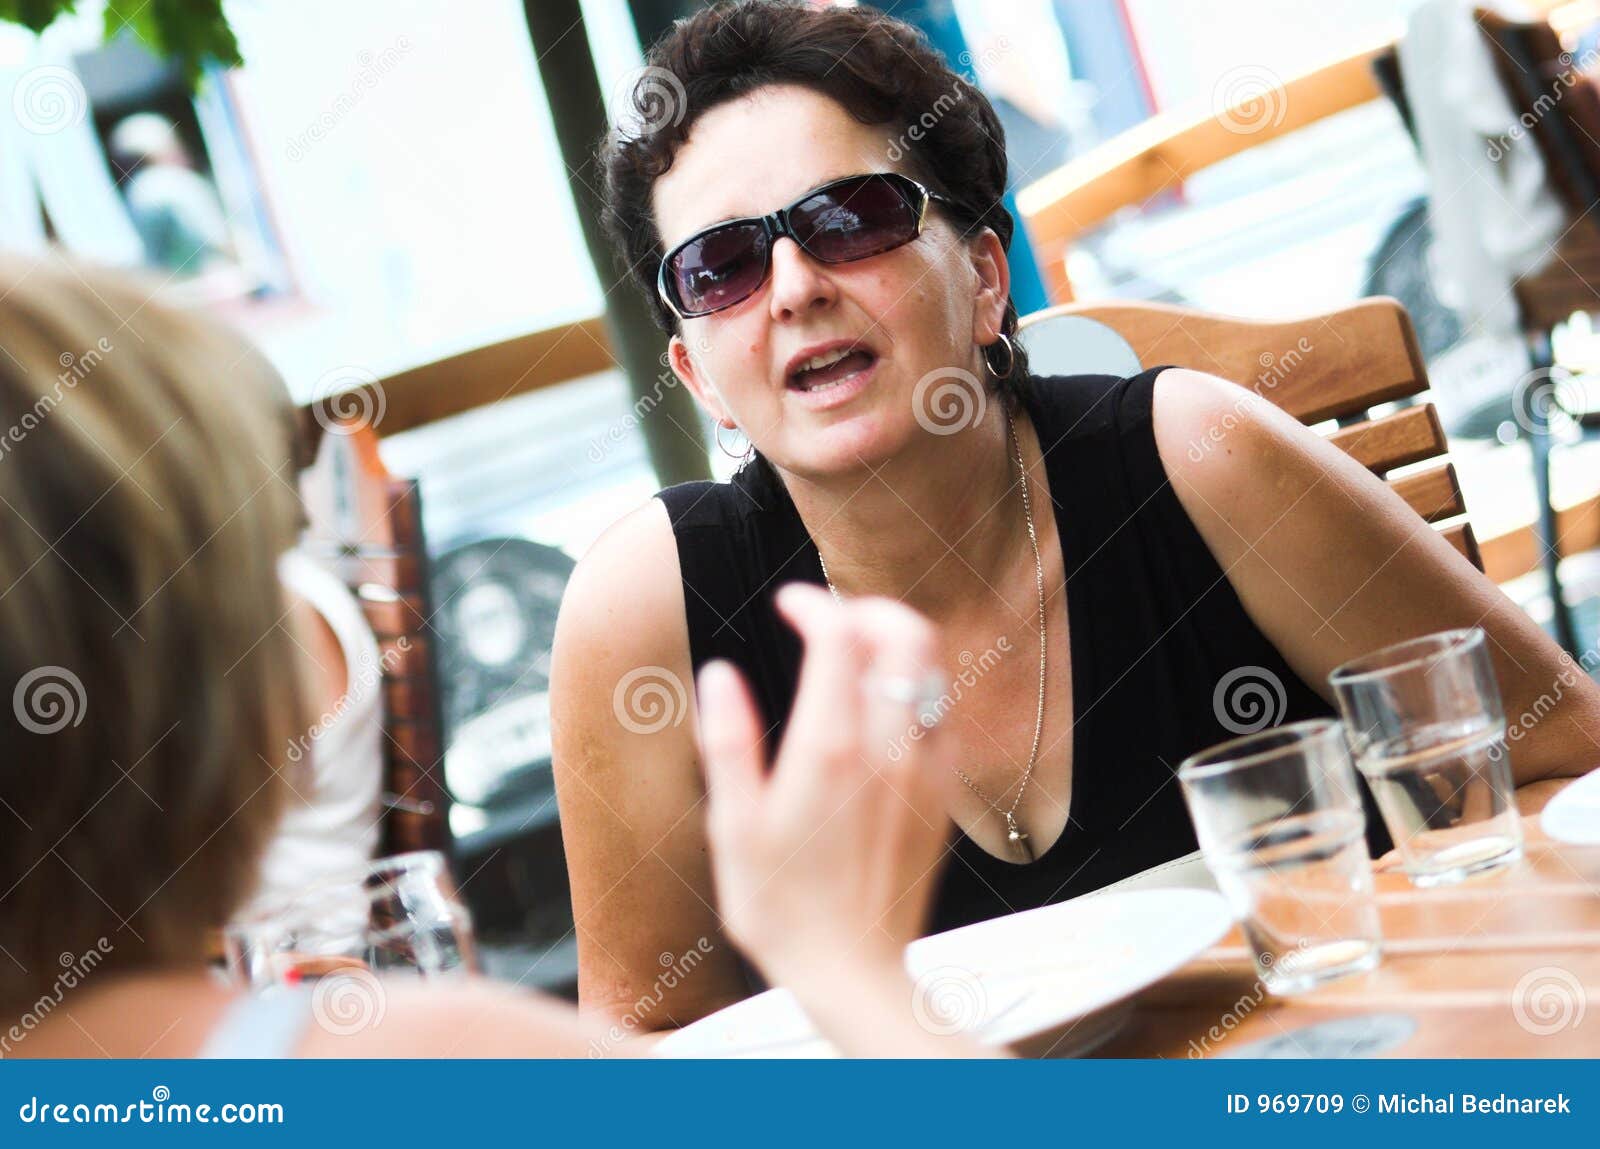 Best friends in a cafe stock image. Image of coffee, laugh - 969709